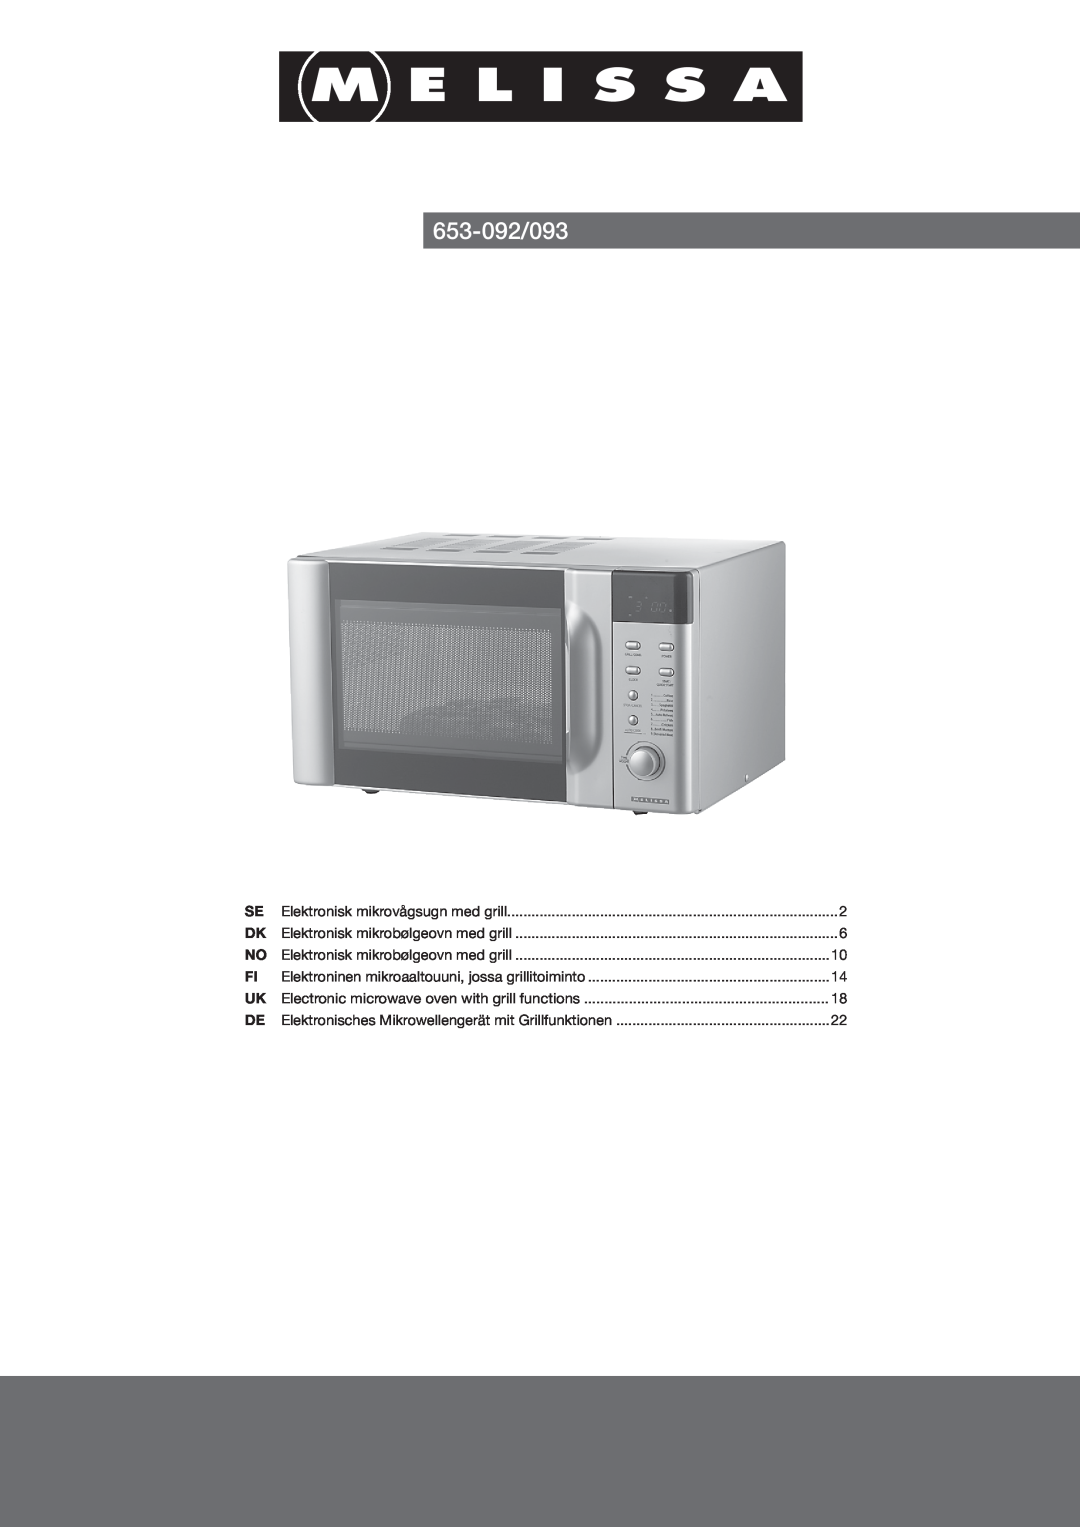 Melissa 653-092/093 manual Electronic microwave oven with grill functions 